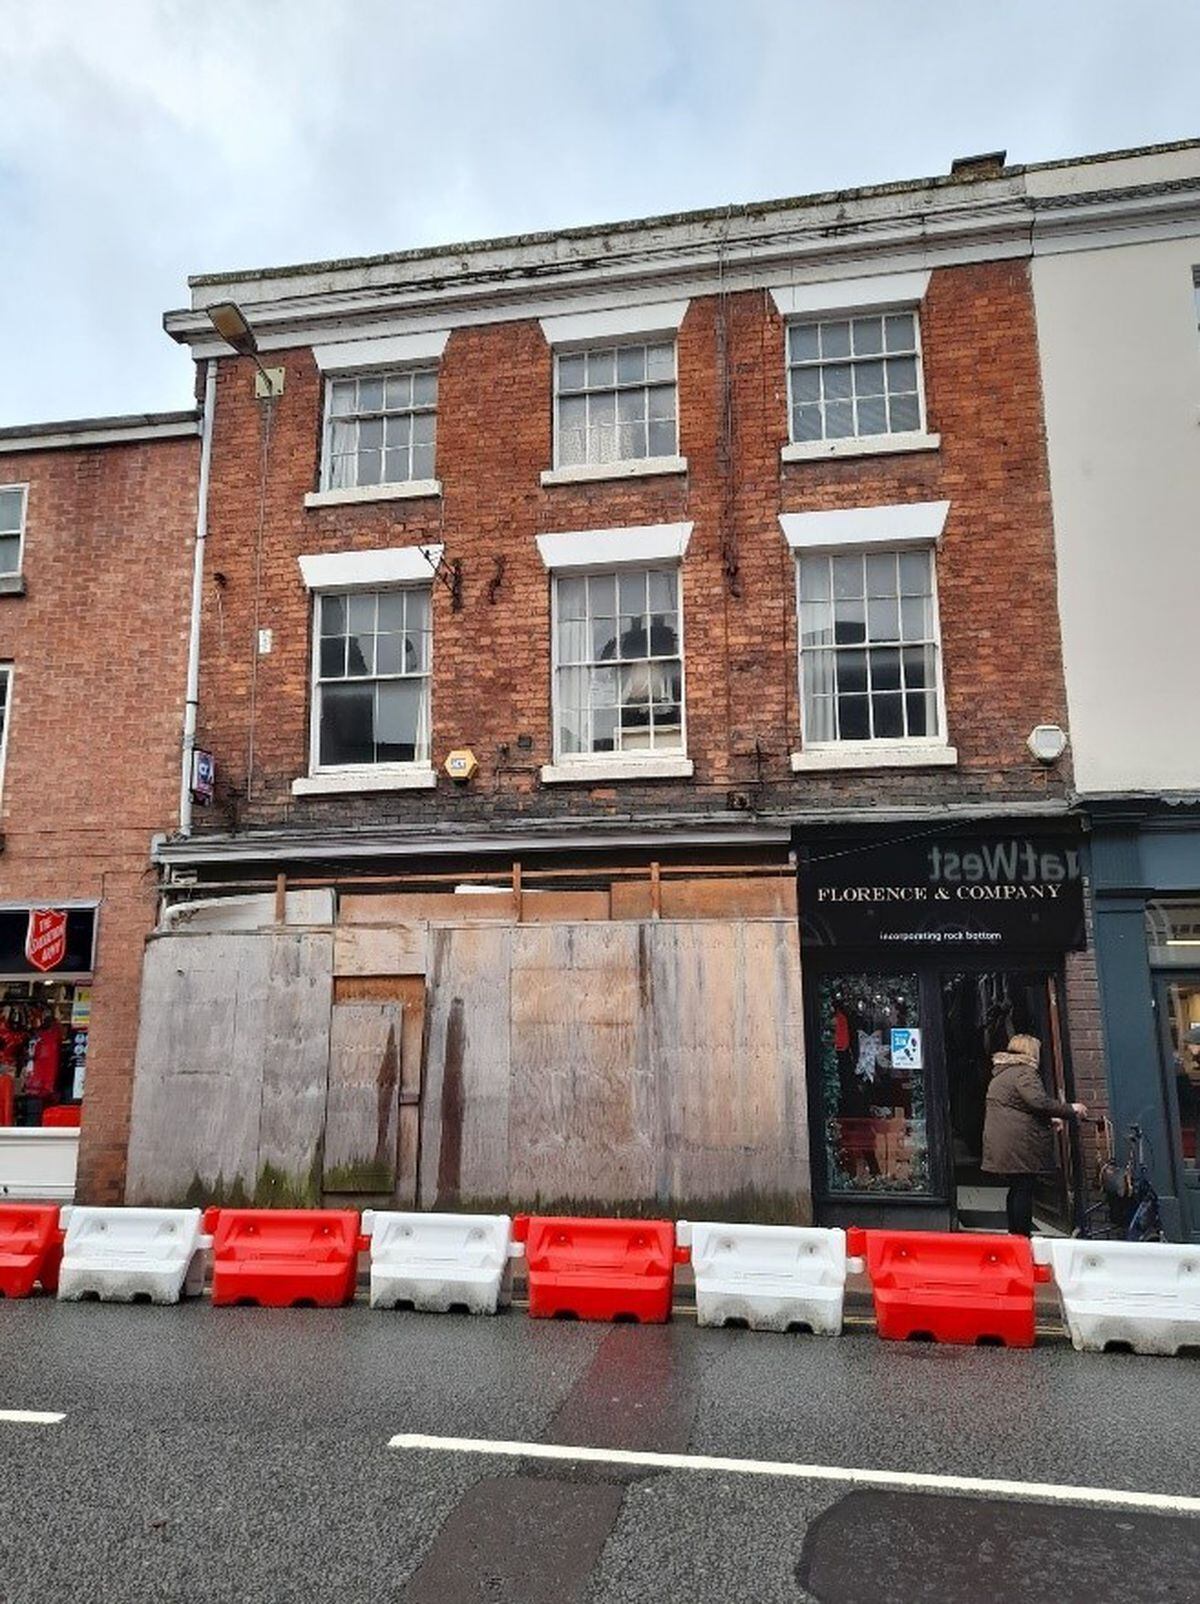 The Church Street building before the work